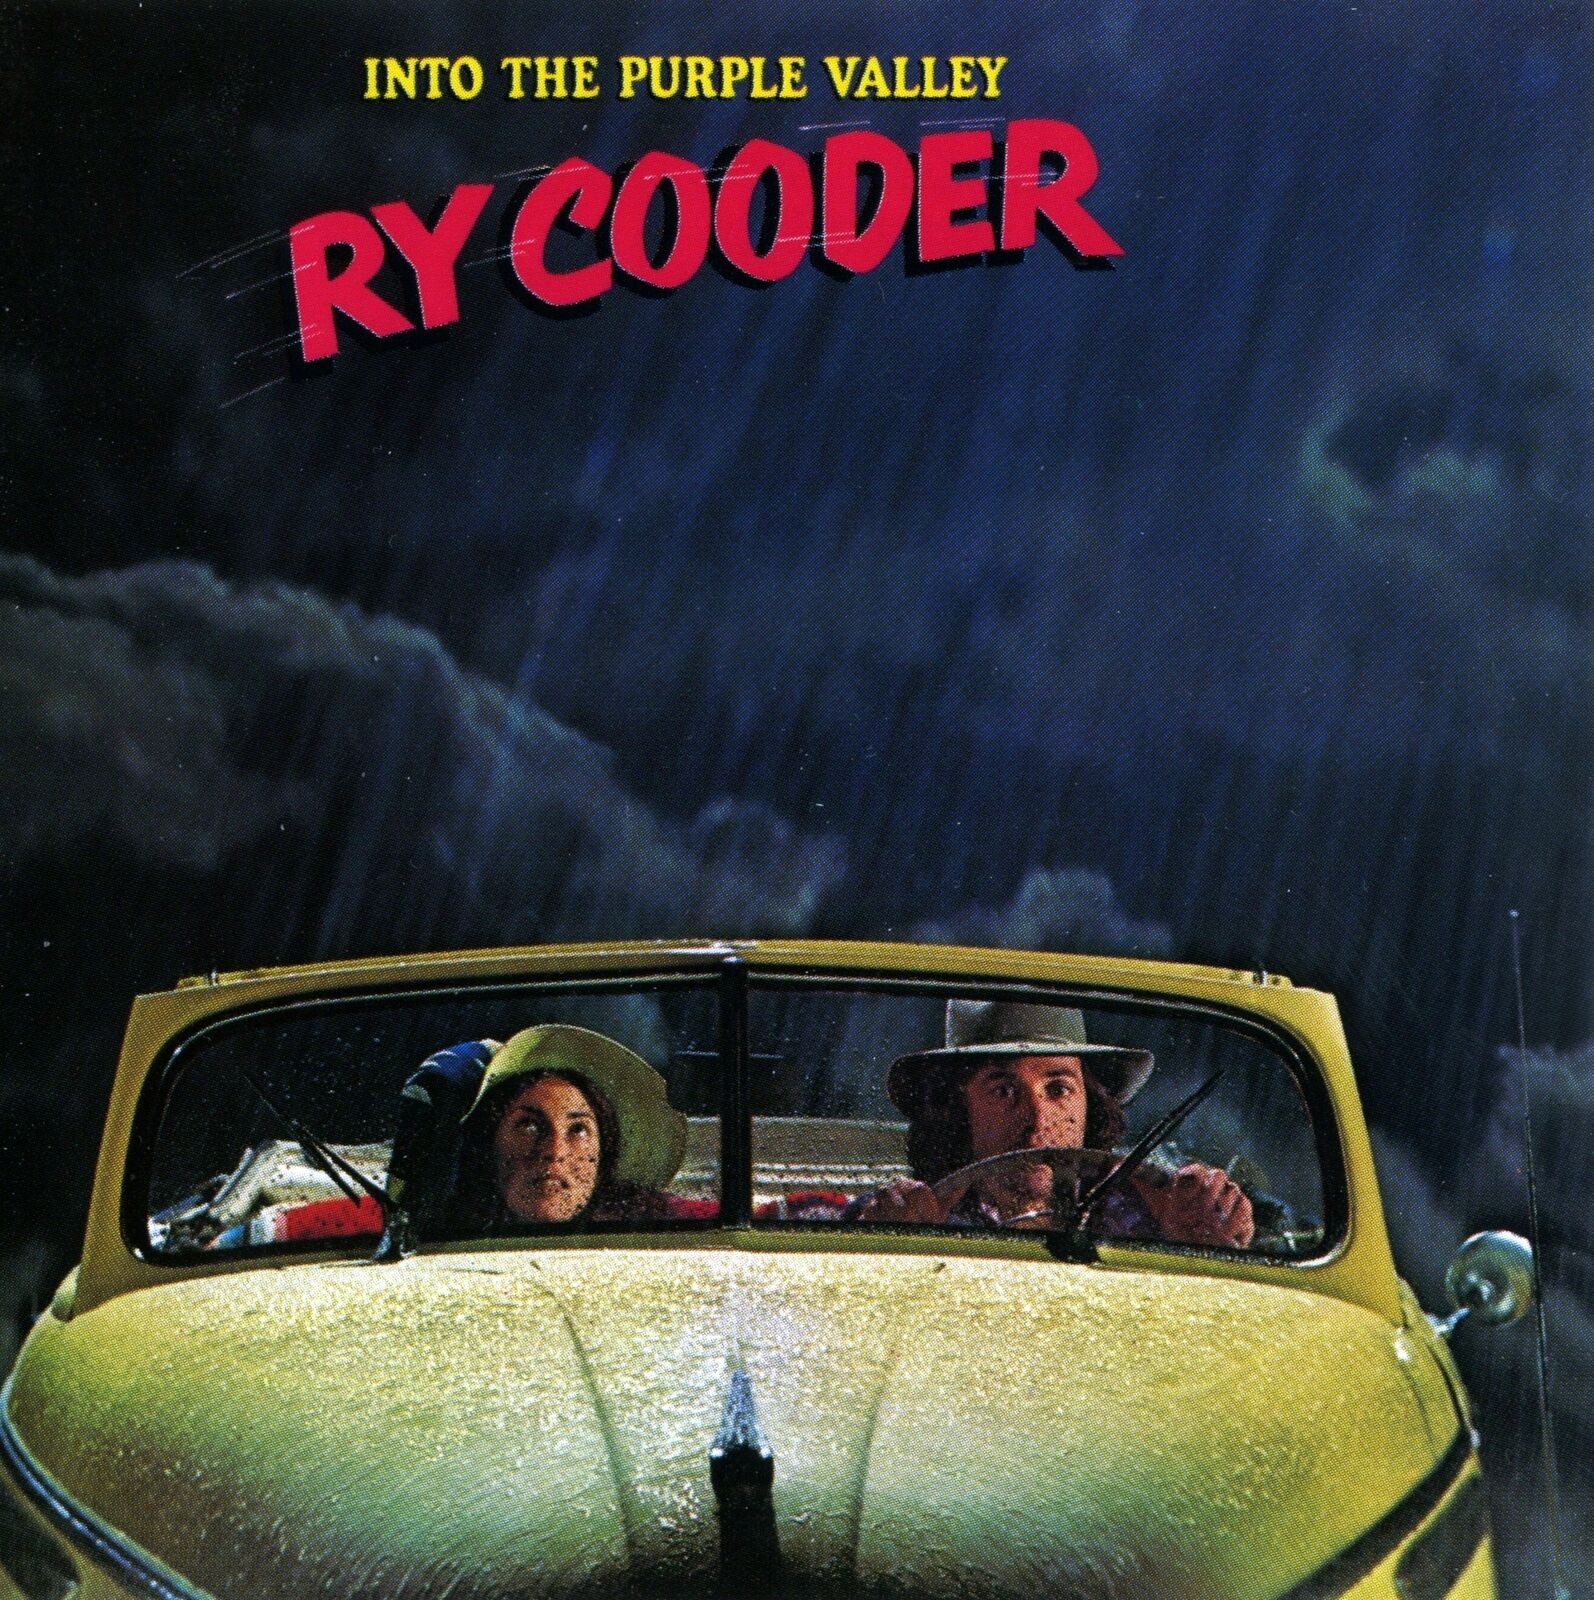 Ry Cooder - Into the Purple Valley 1972 - album cover